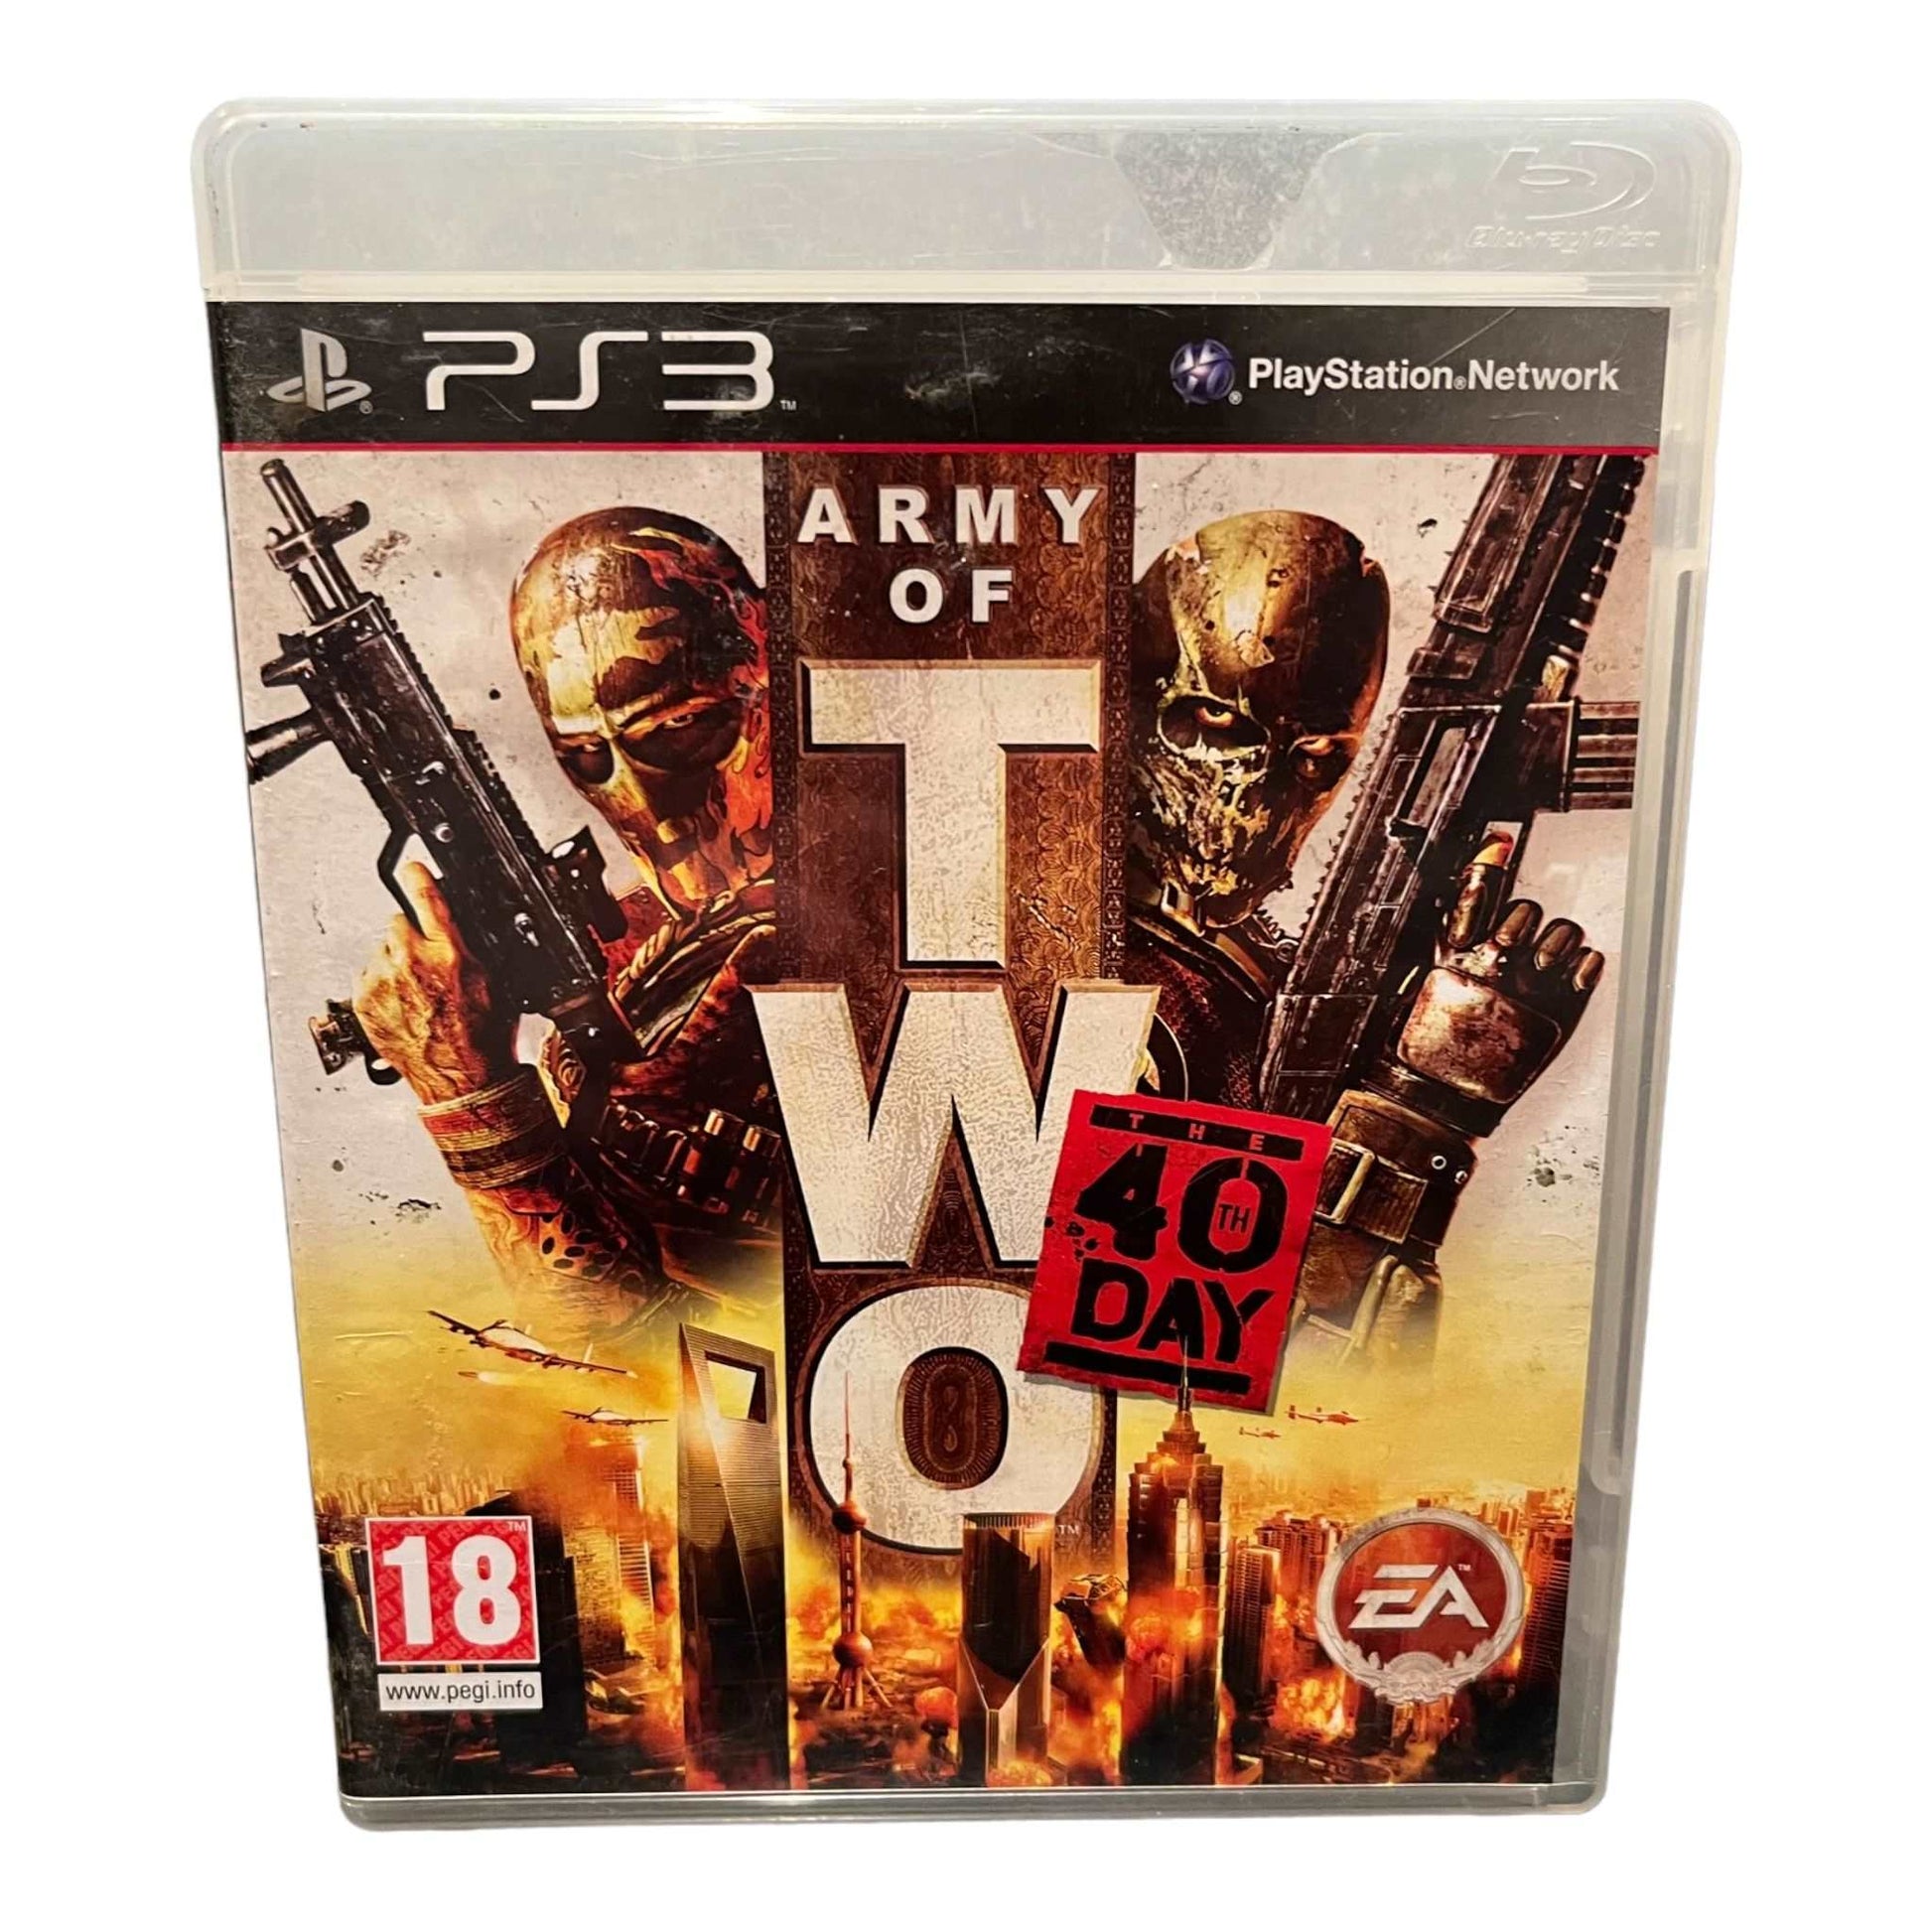 Army Of Two: 40th Day - PS3